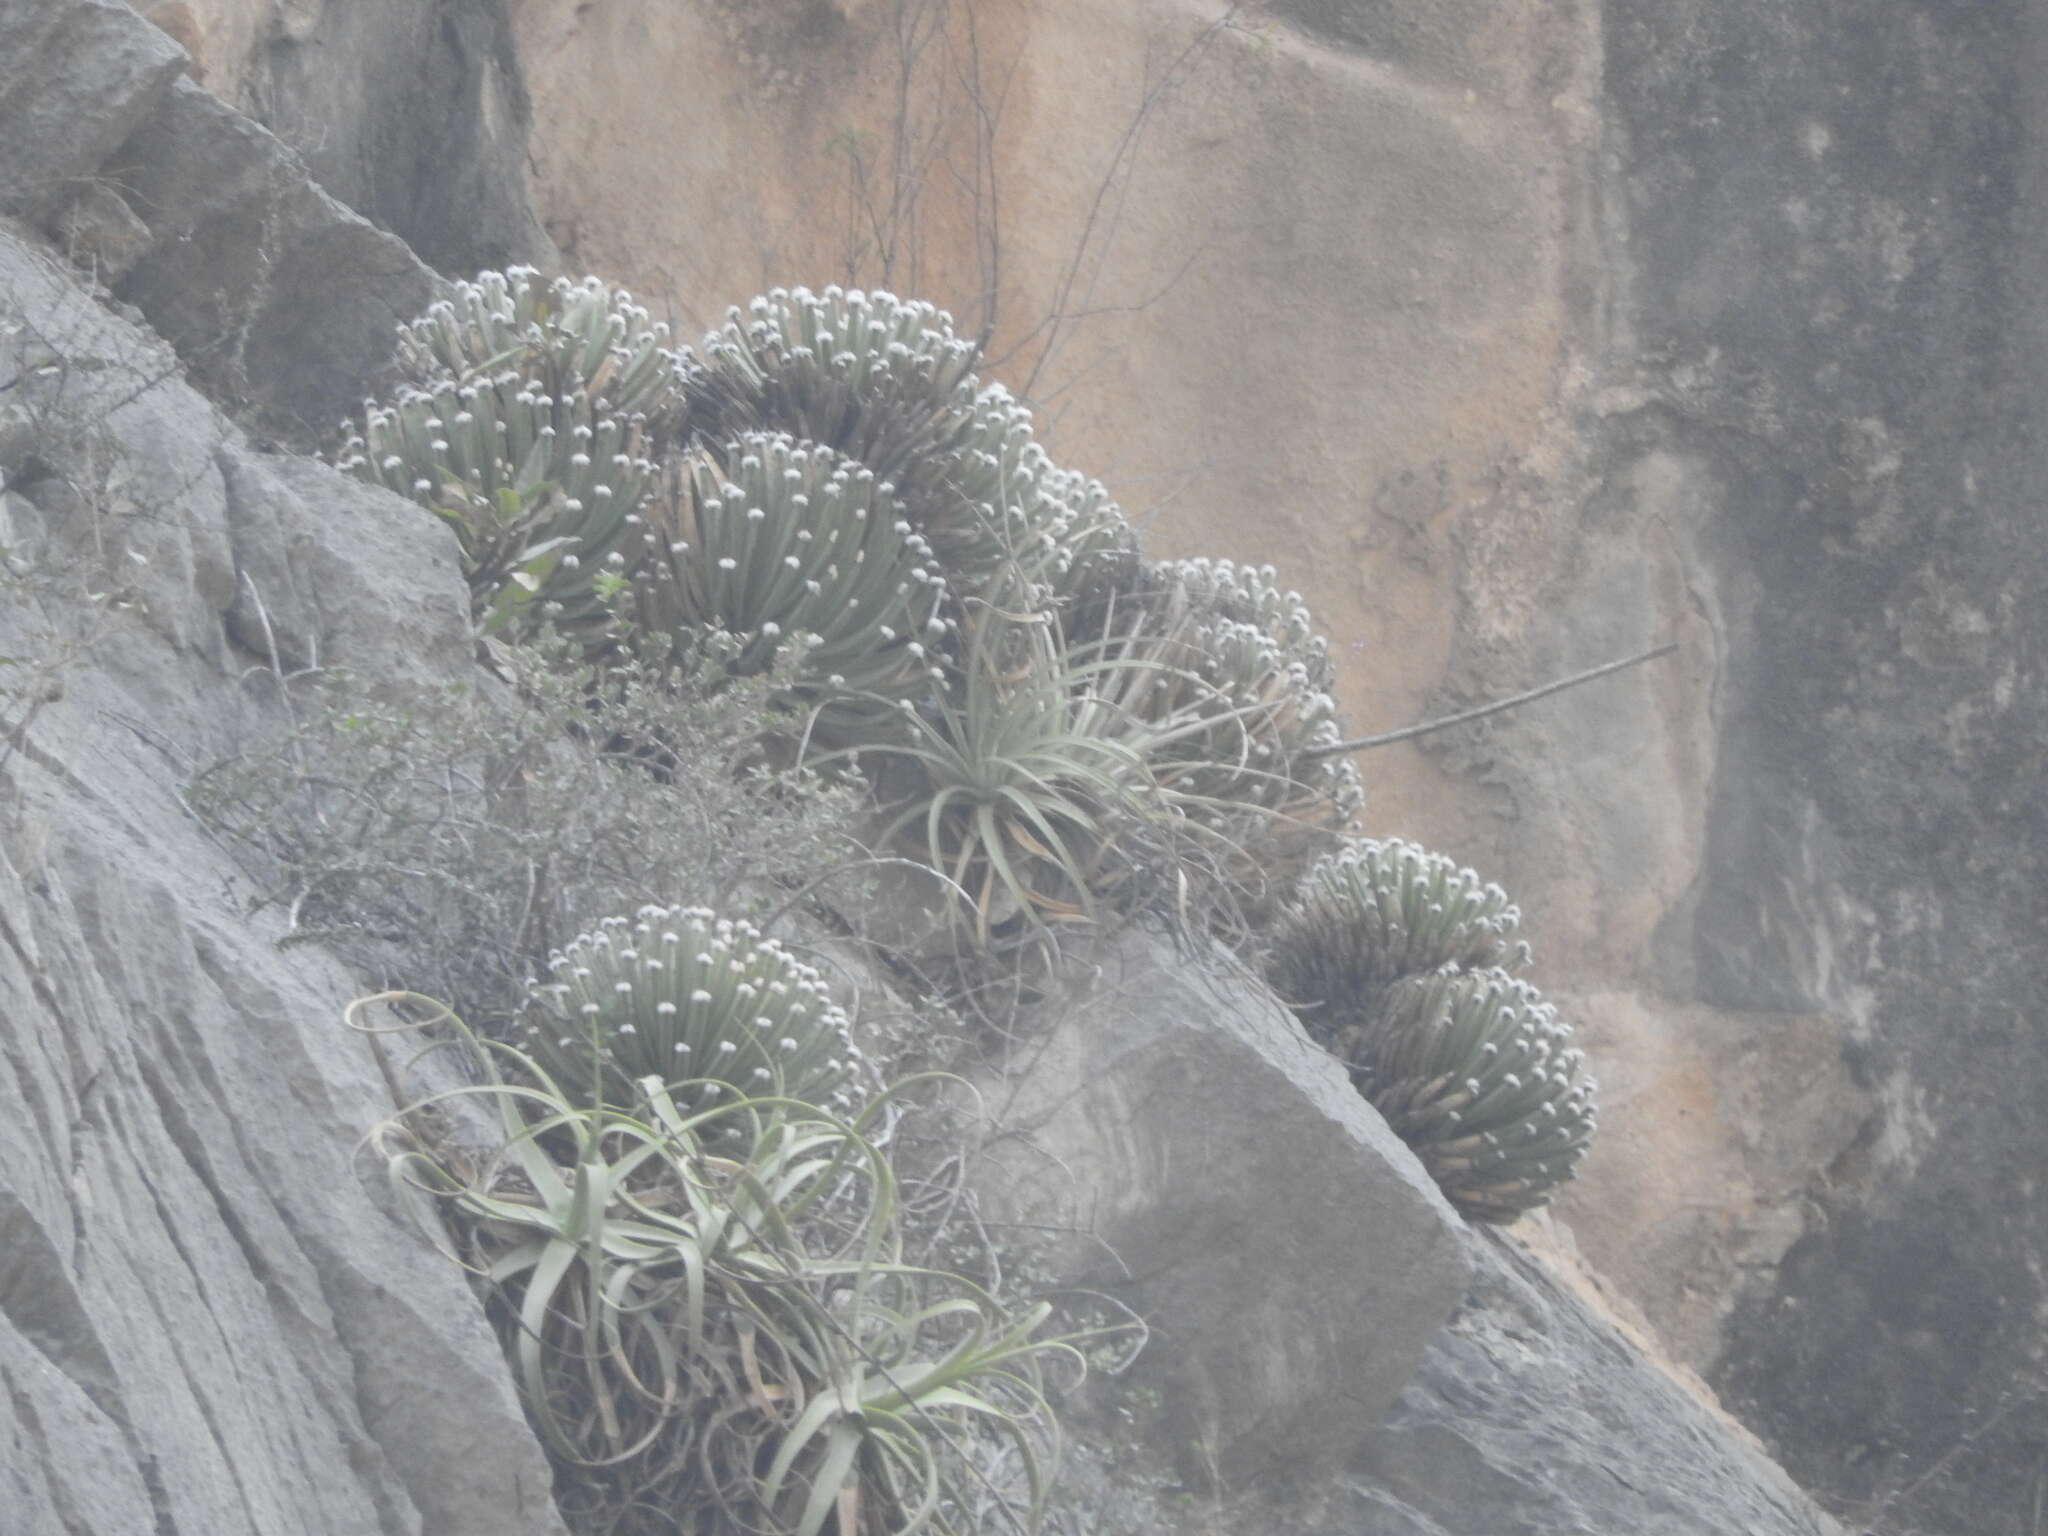 Image of Hair-tipped Century Plant